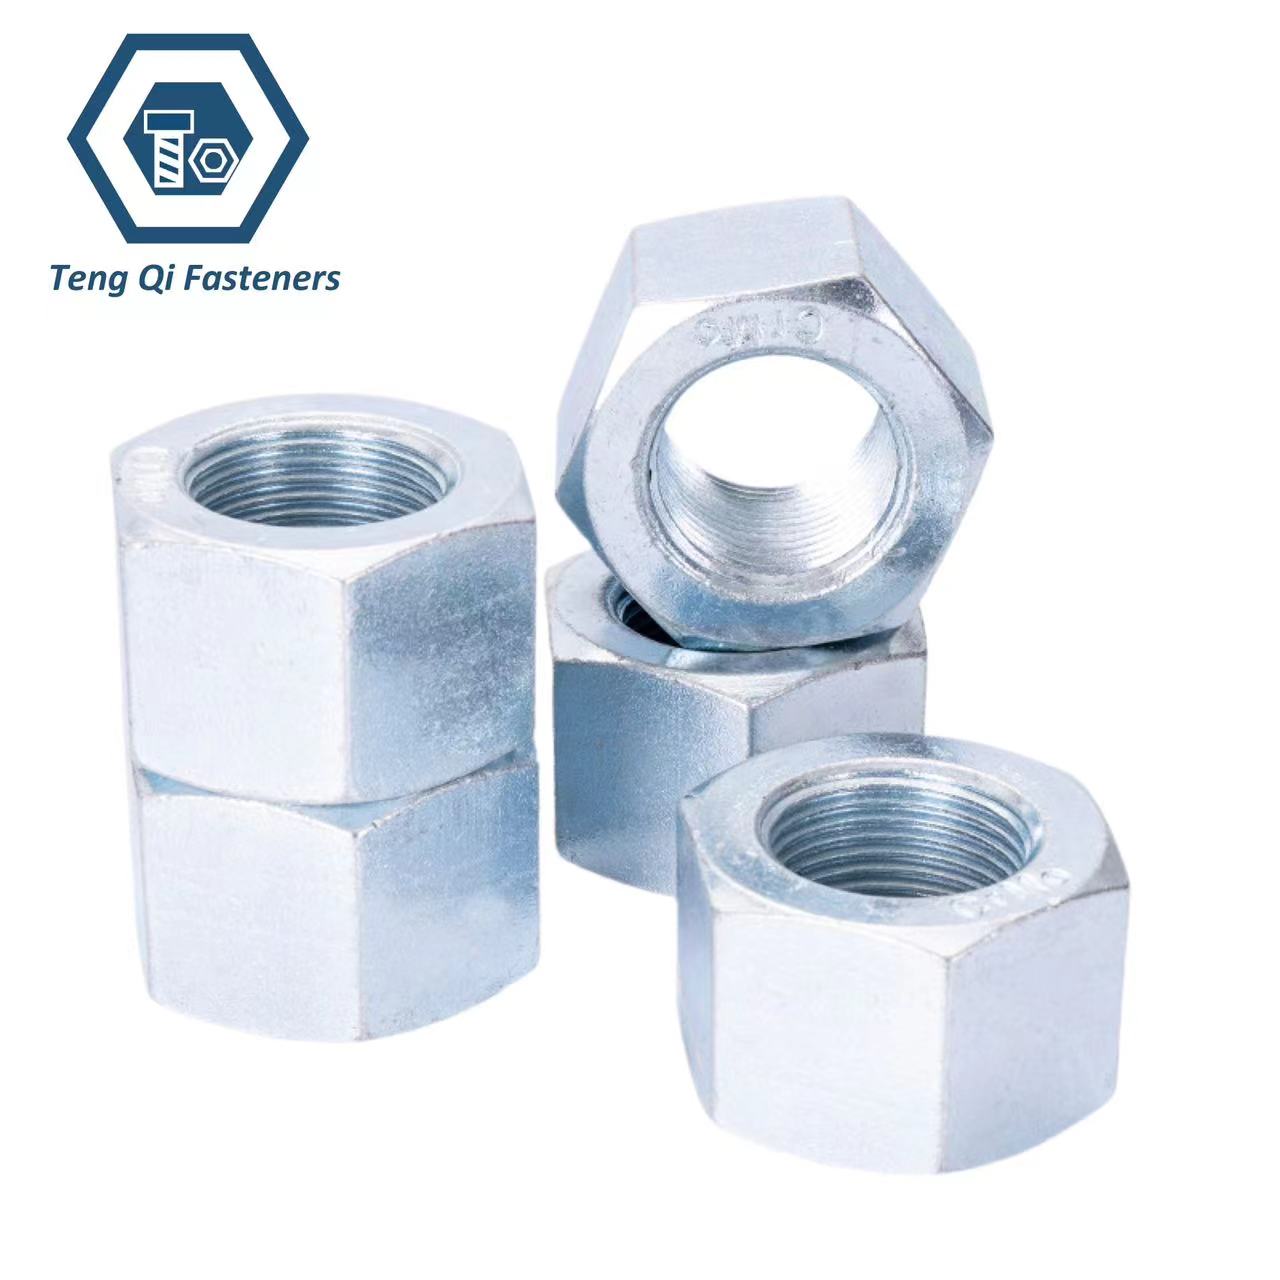 GOST R 52645 High-Strength Galvanized Heavy Hex Large Structural Hex Nuts